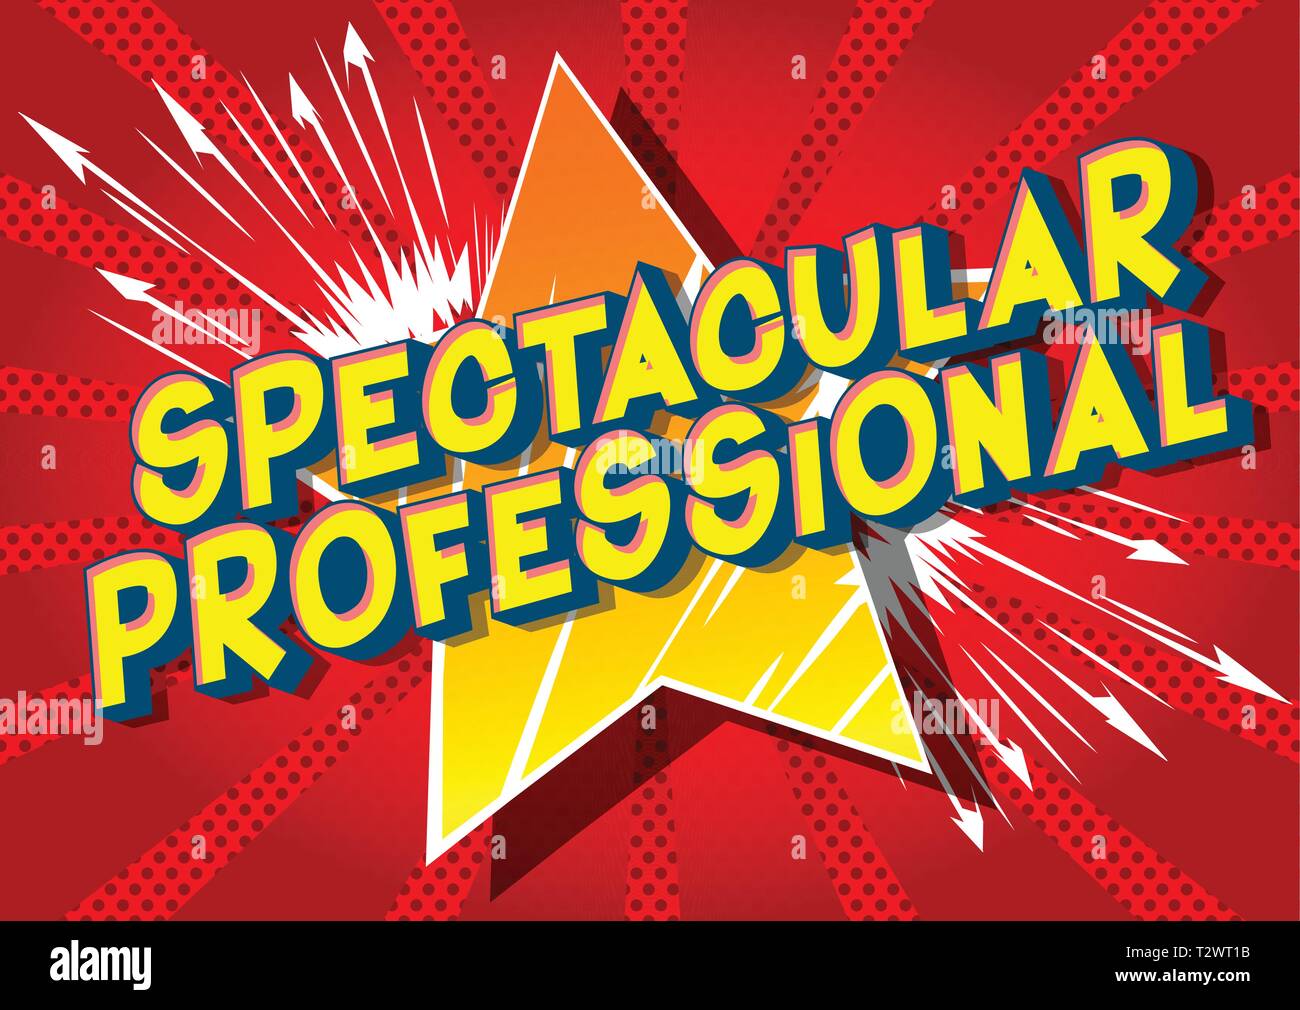 Spectacular Professional - Vector illustrated comic book style phrase on abstract background. Stock Vector